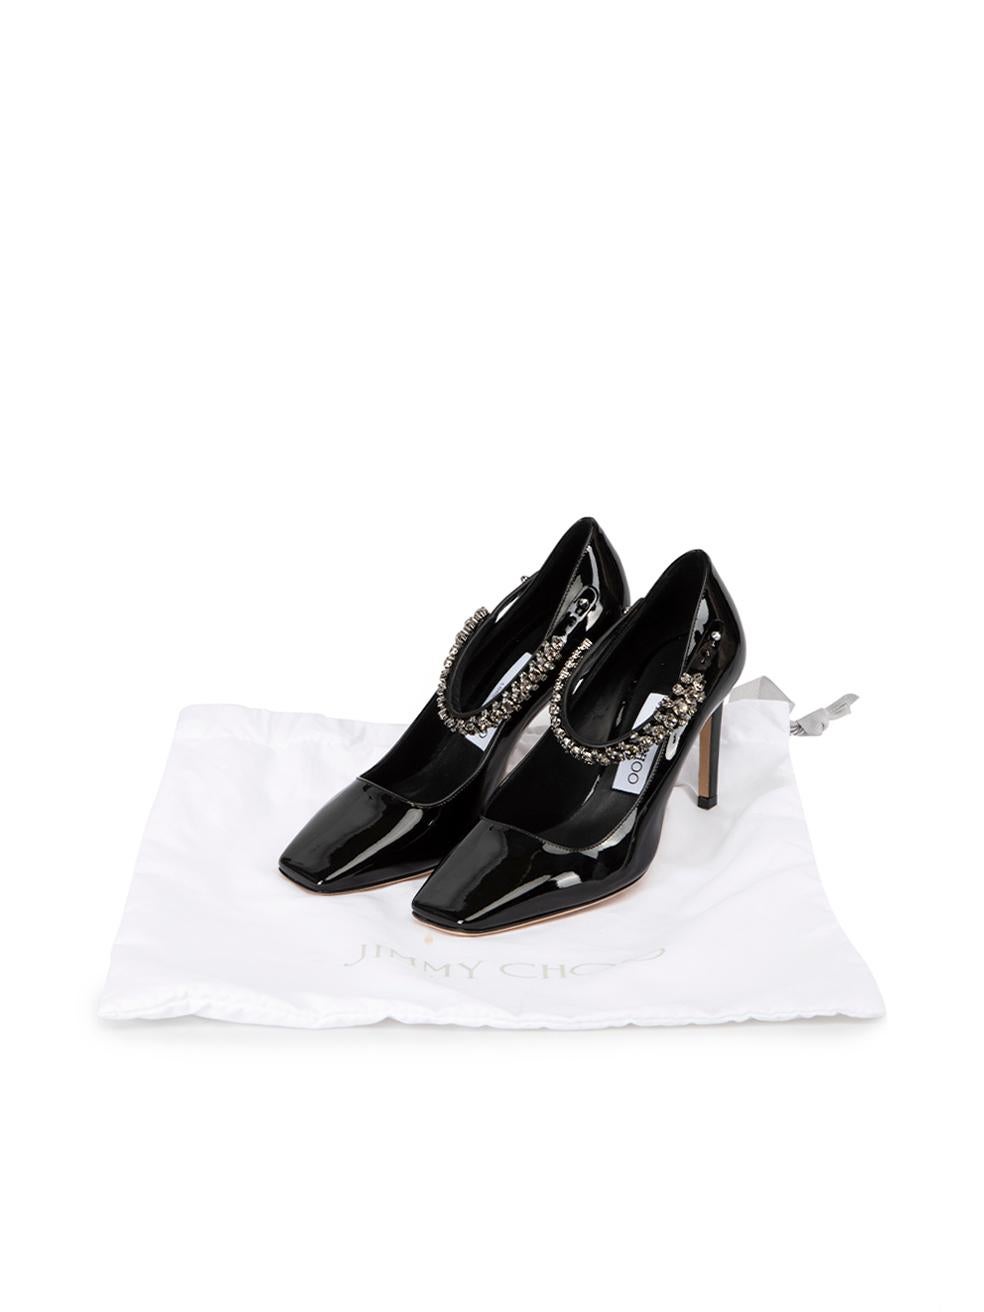 Black Patent Leather Malva 85 Crystal Detail Heels Size IT 36 For Sale 1